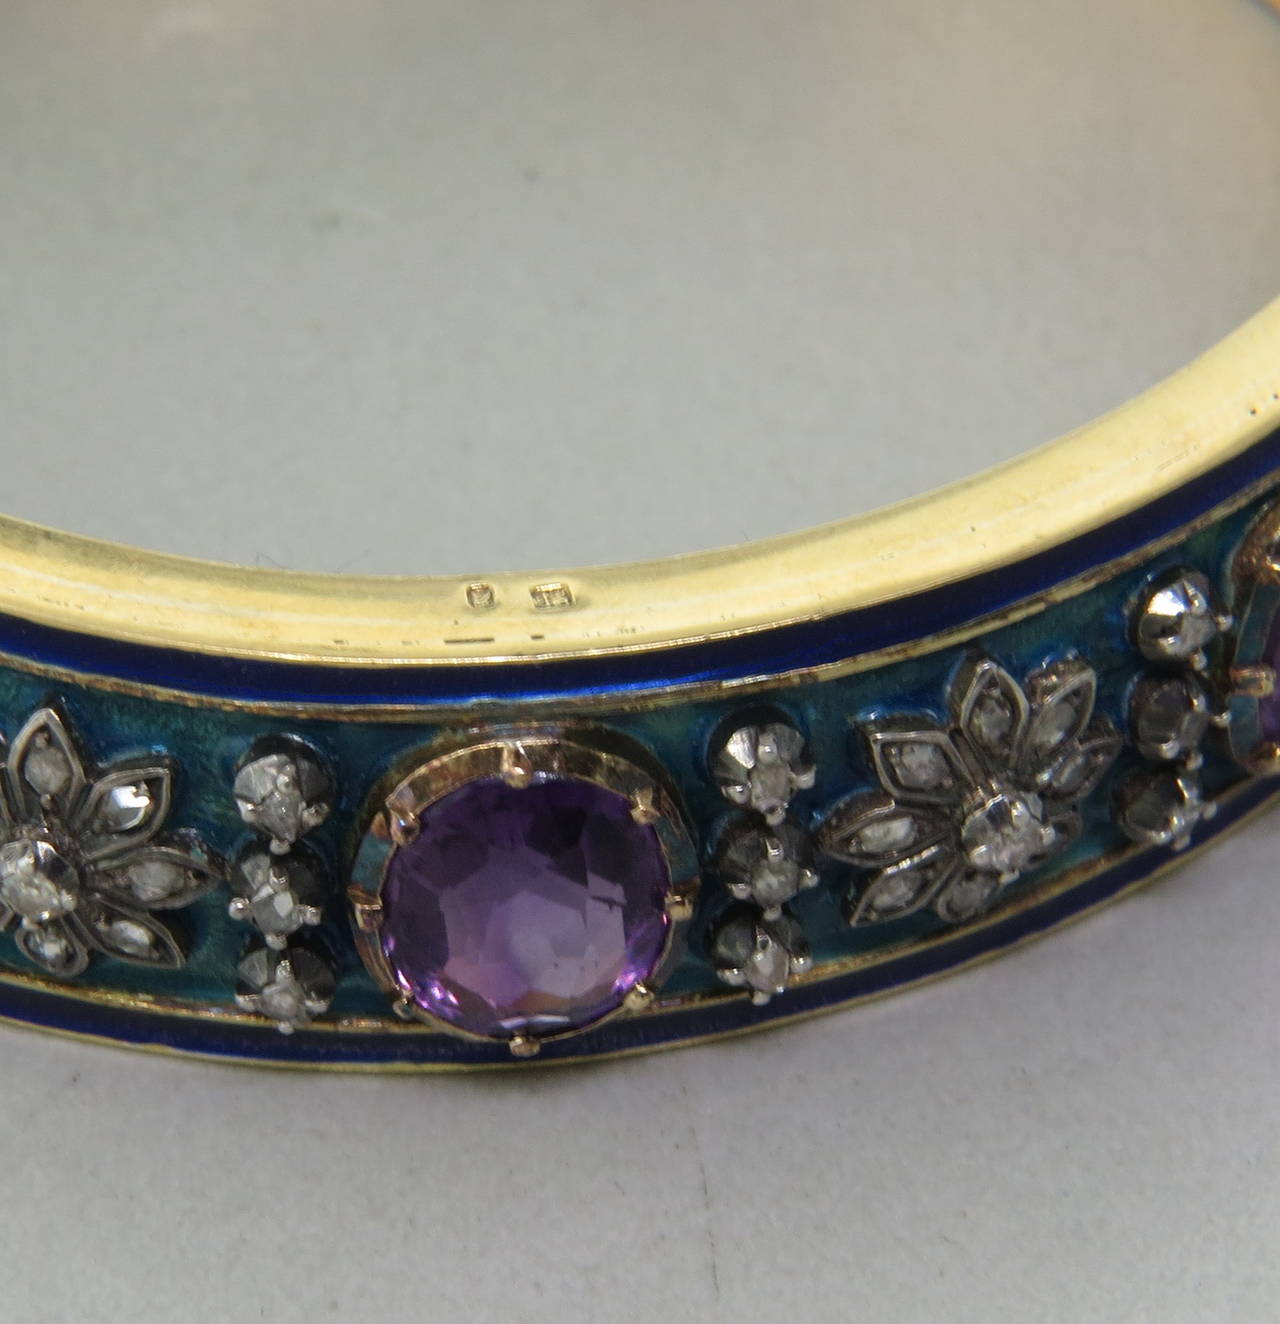 A hand engraved 18k yellow gold bracelet from the Victorian era, set with rose cut diamonds and amethyst and enamel.  The bracelet comfortably fits up to a 7